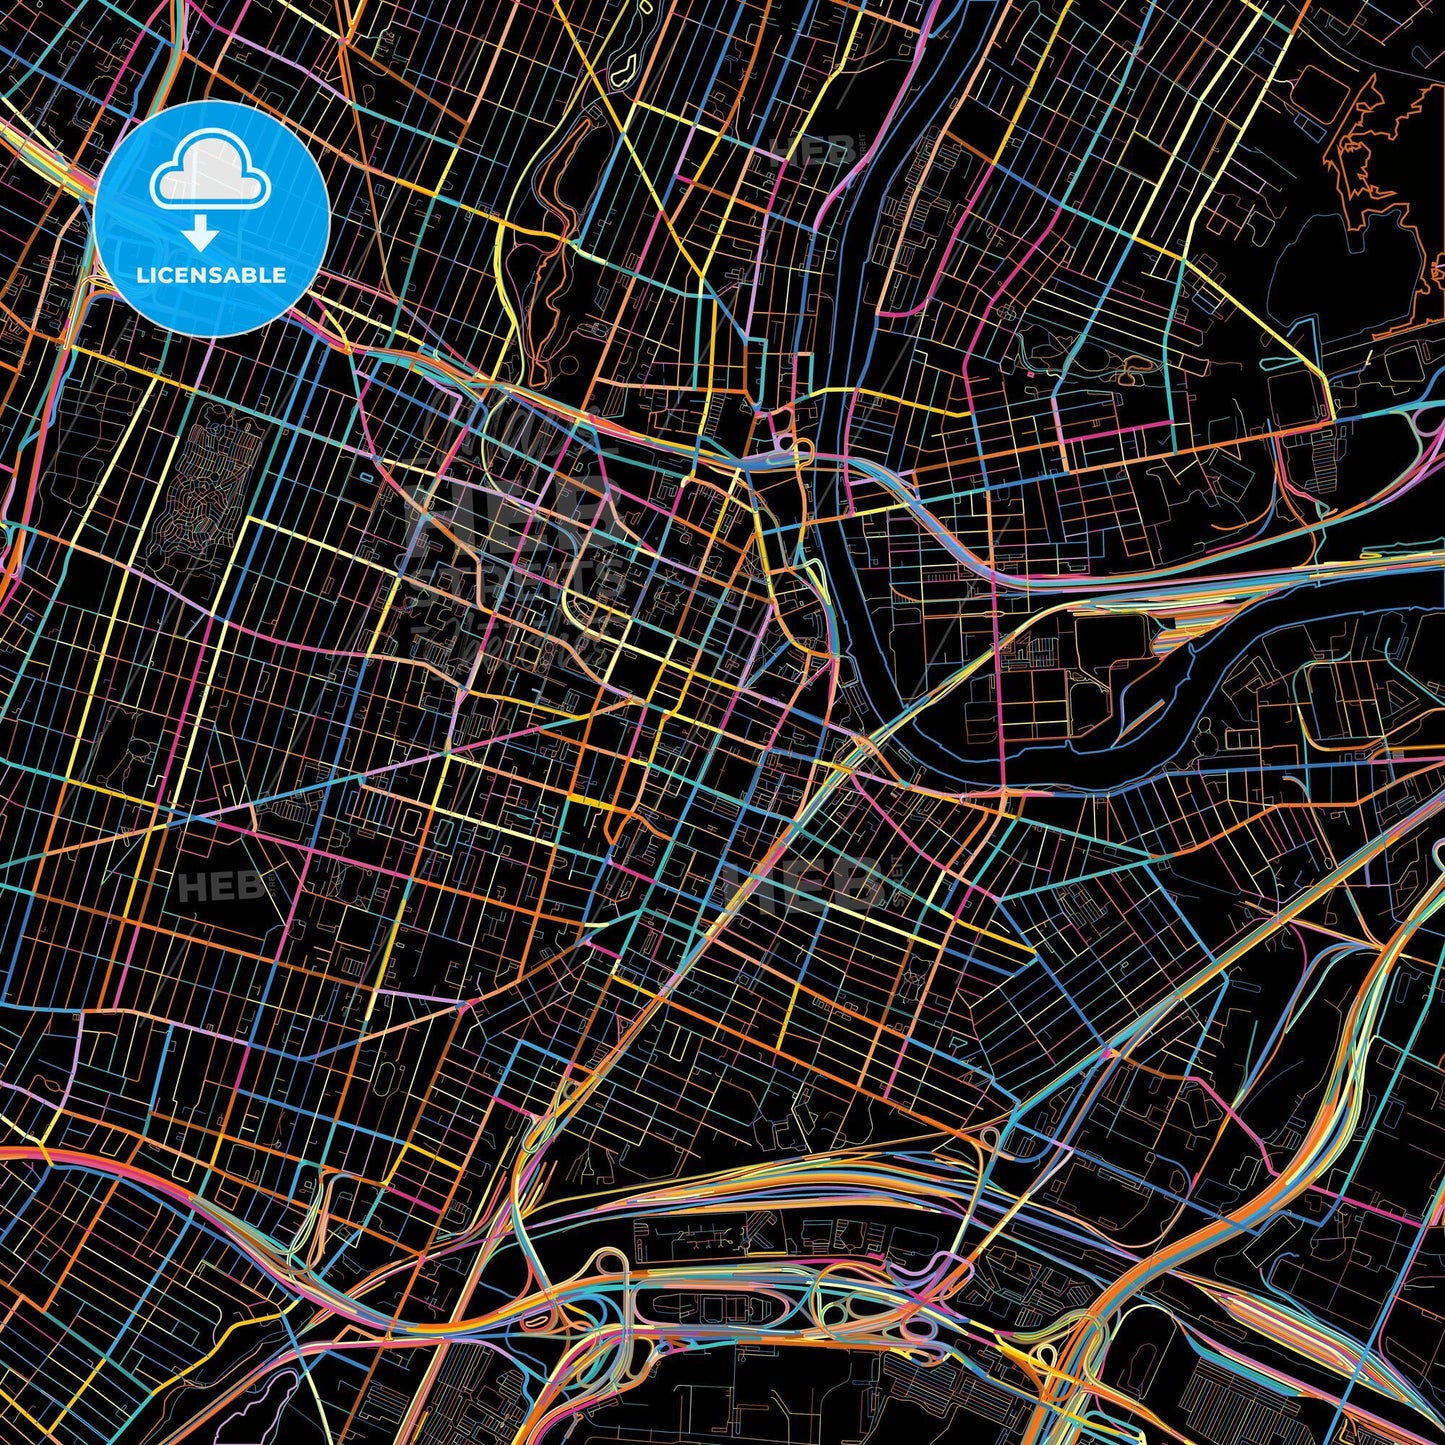 Newark, New Jersey, United States, colorful city map on black background